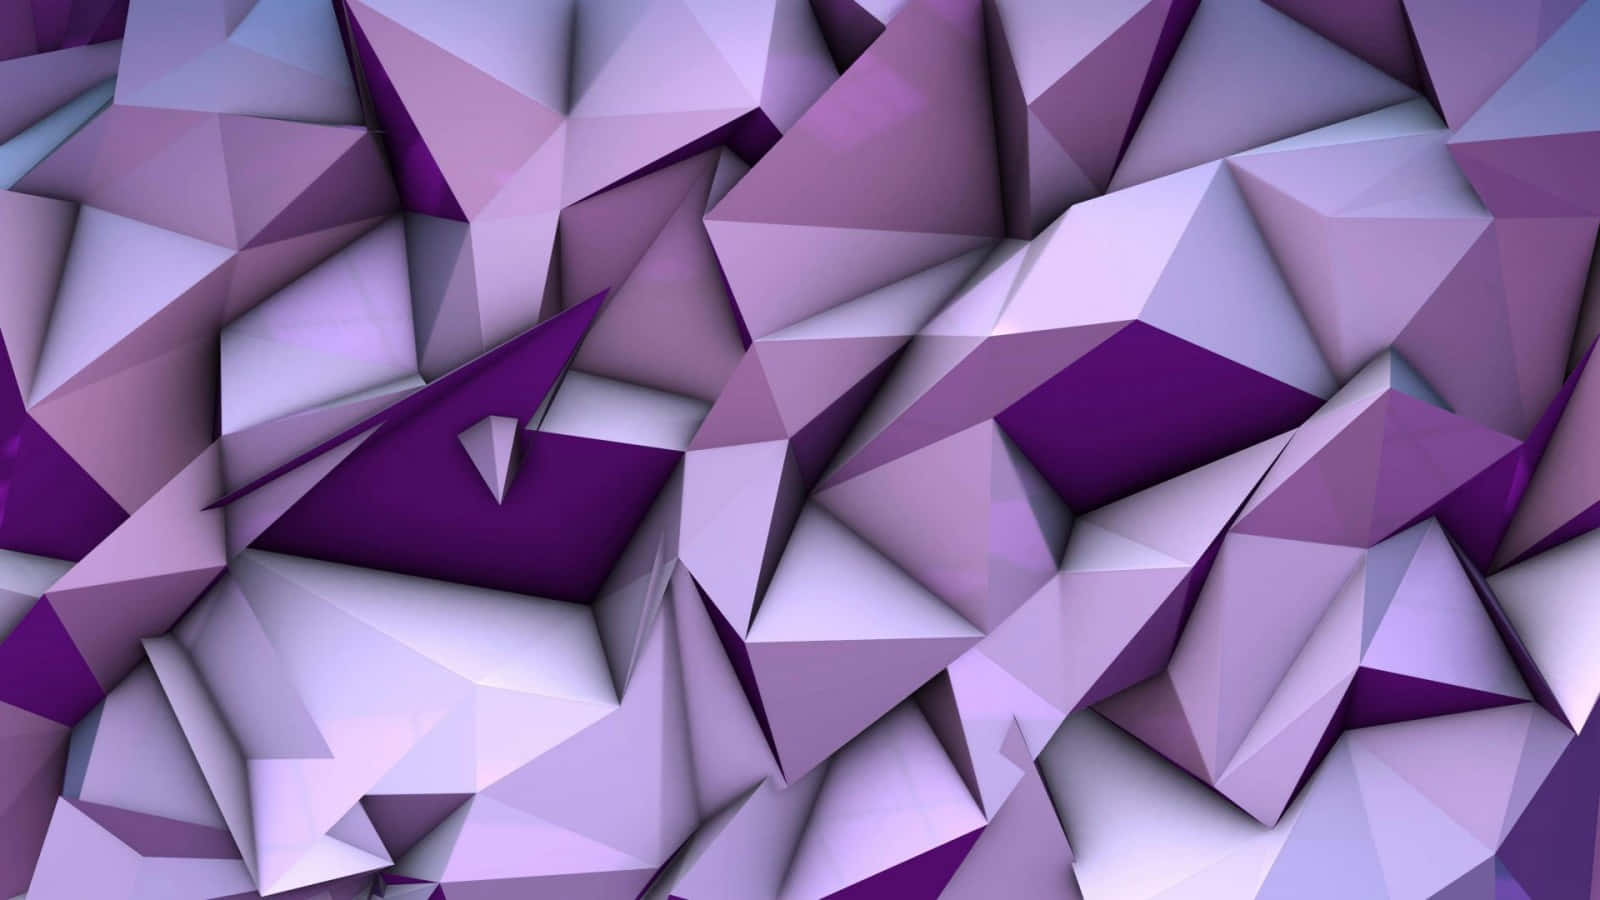 Feel The Coolness Of Purple! Wallpaper